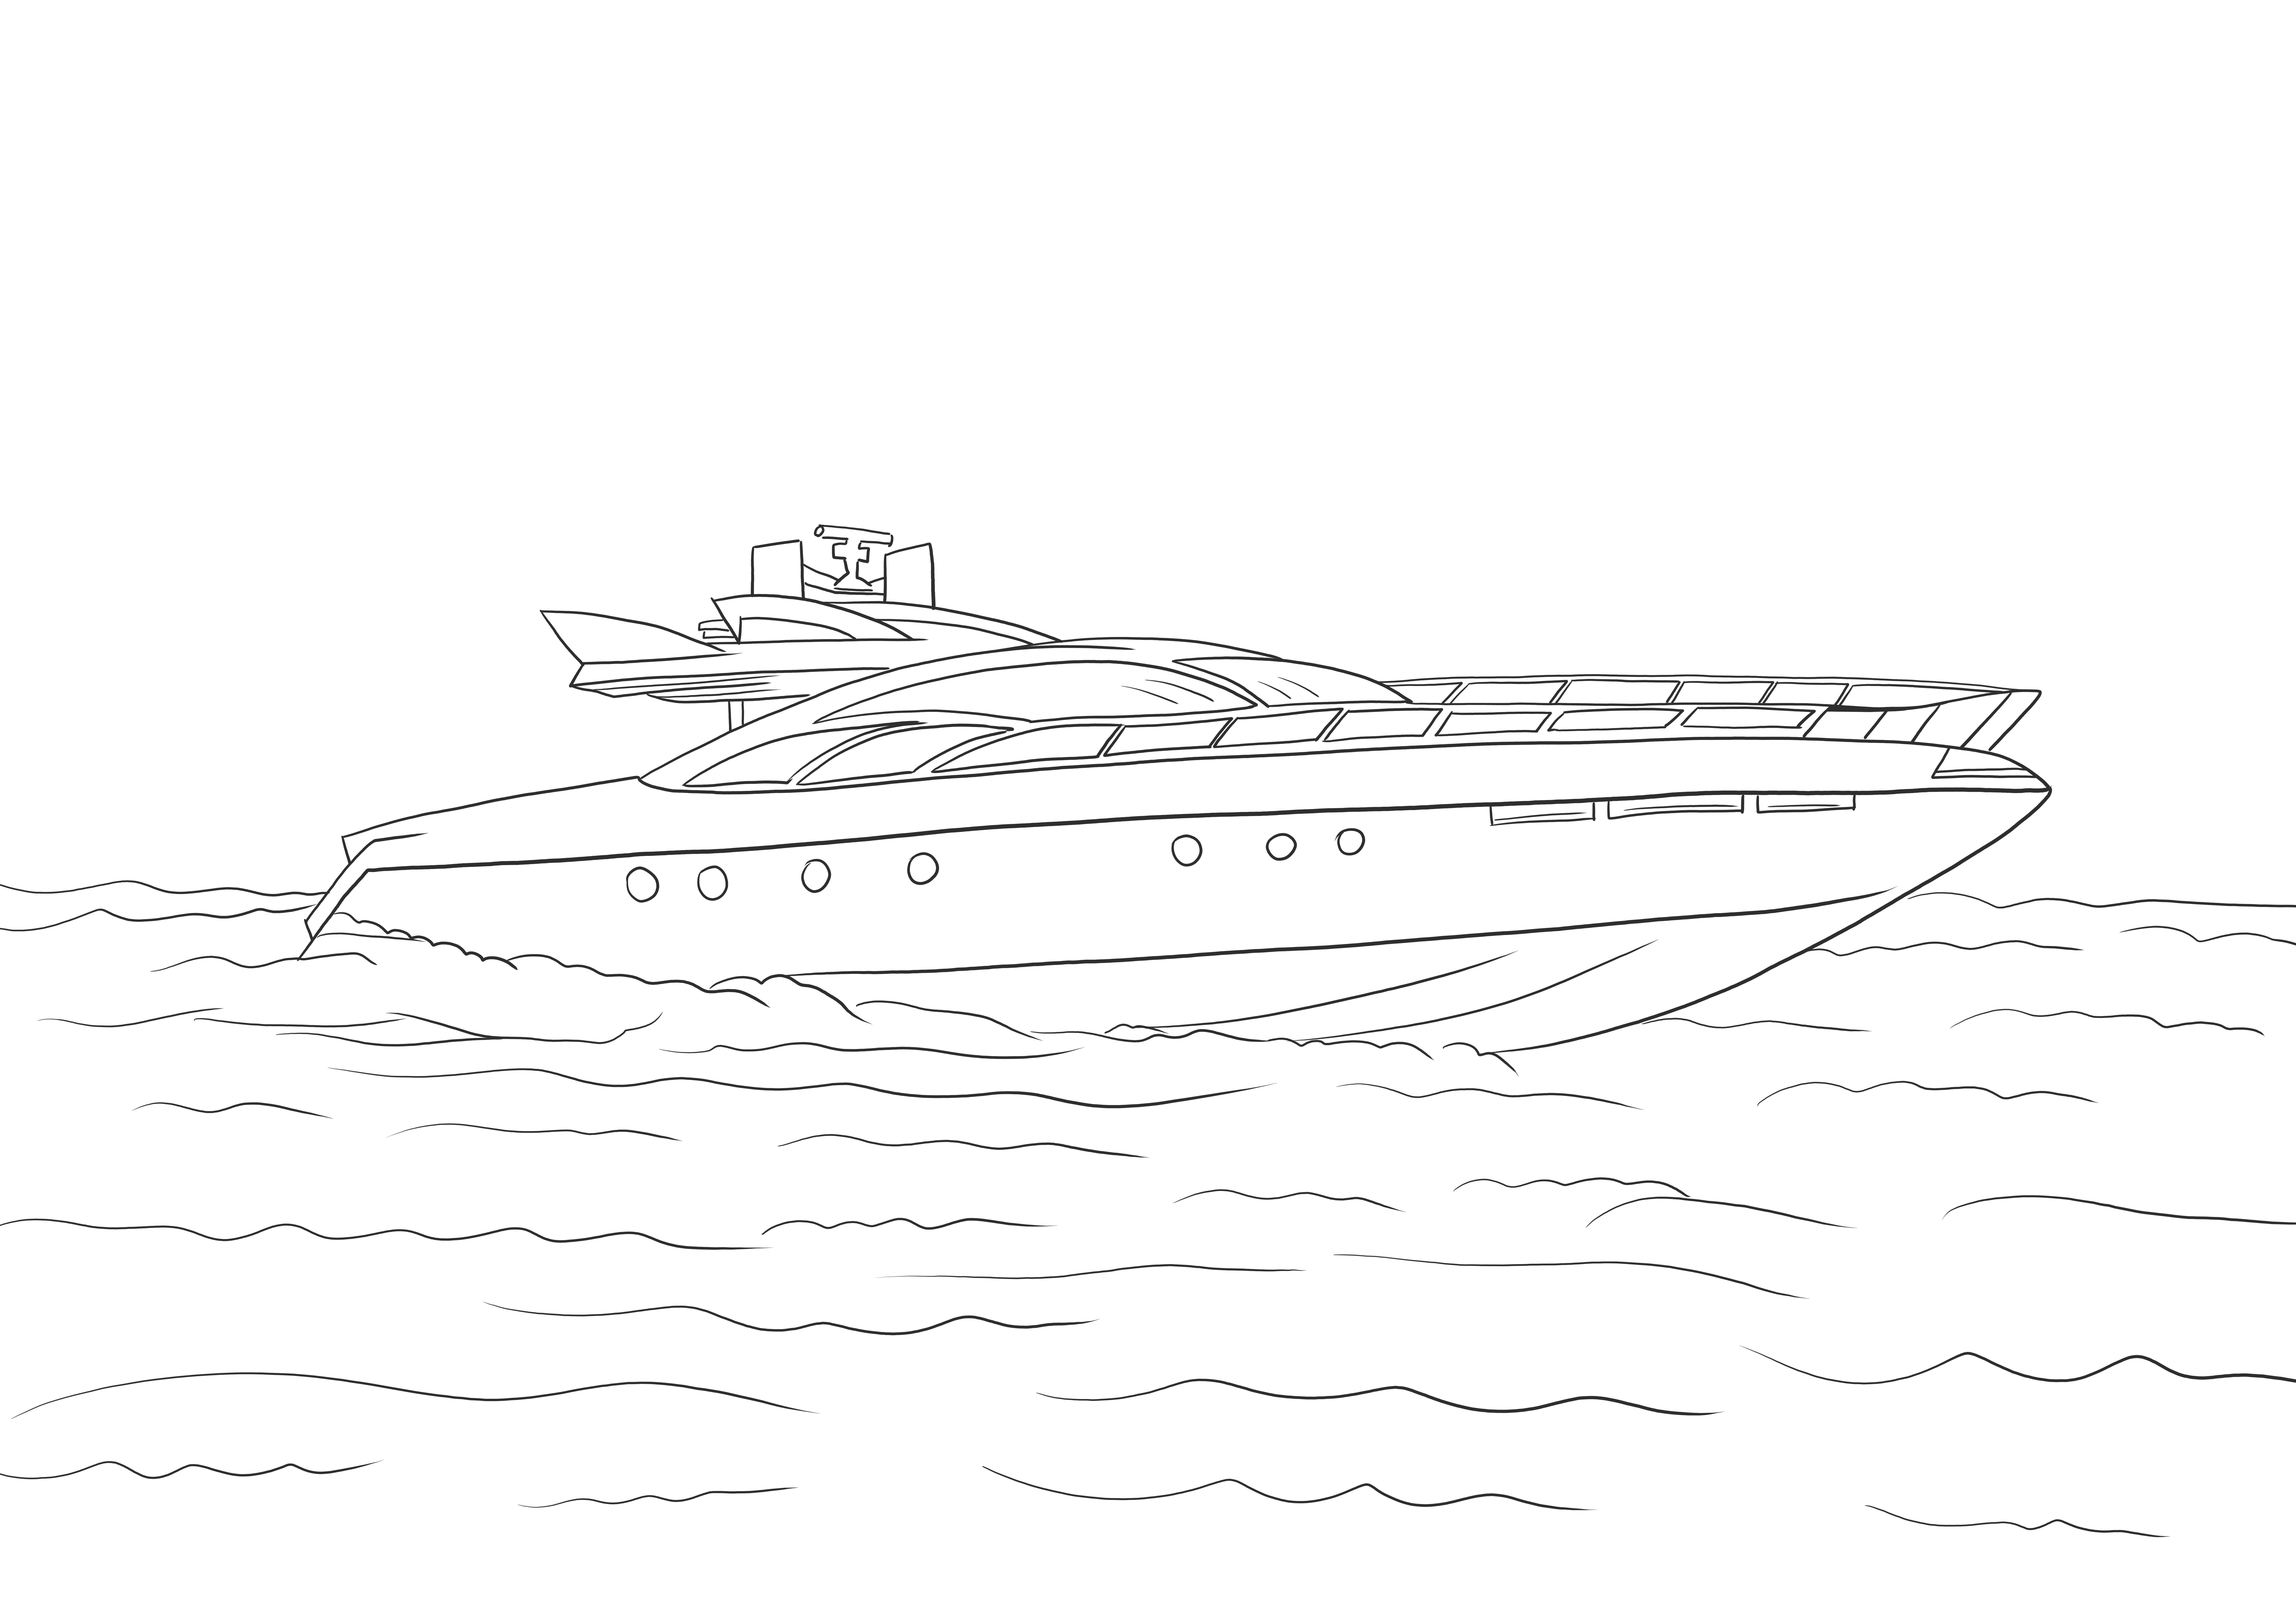 Modern speed boat freebie to color for kids of all ages